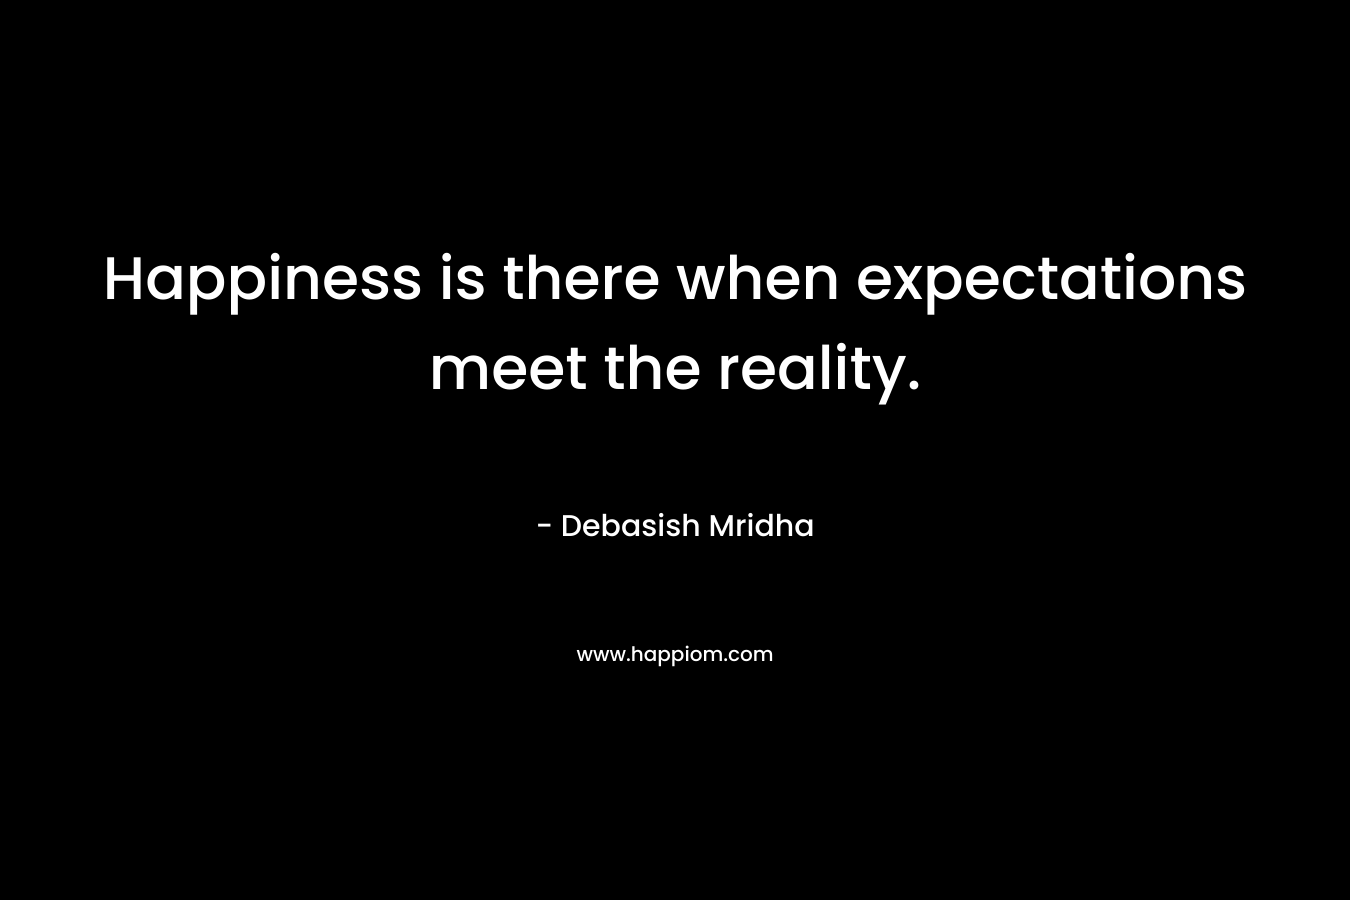 Happiness is there when expectations meet the reality.